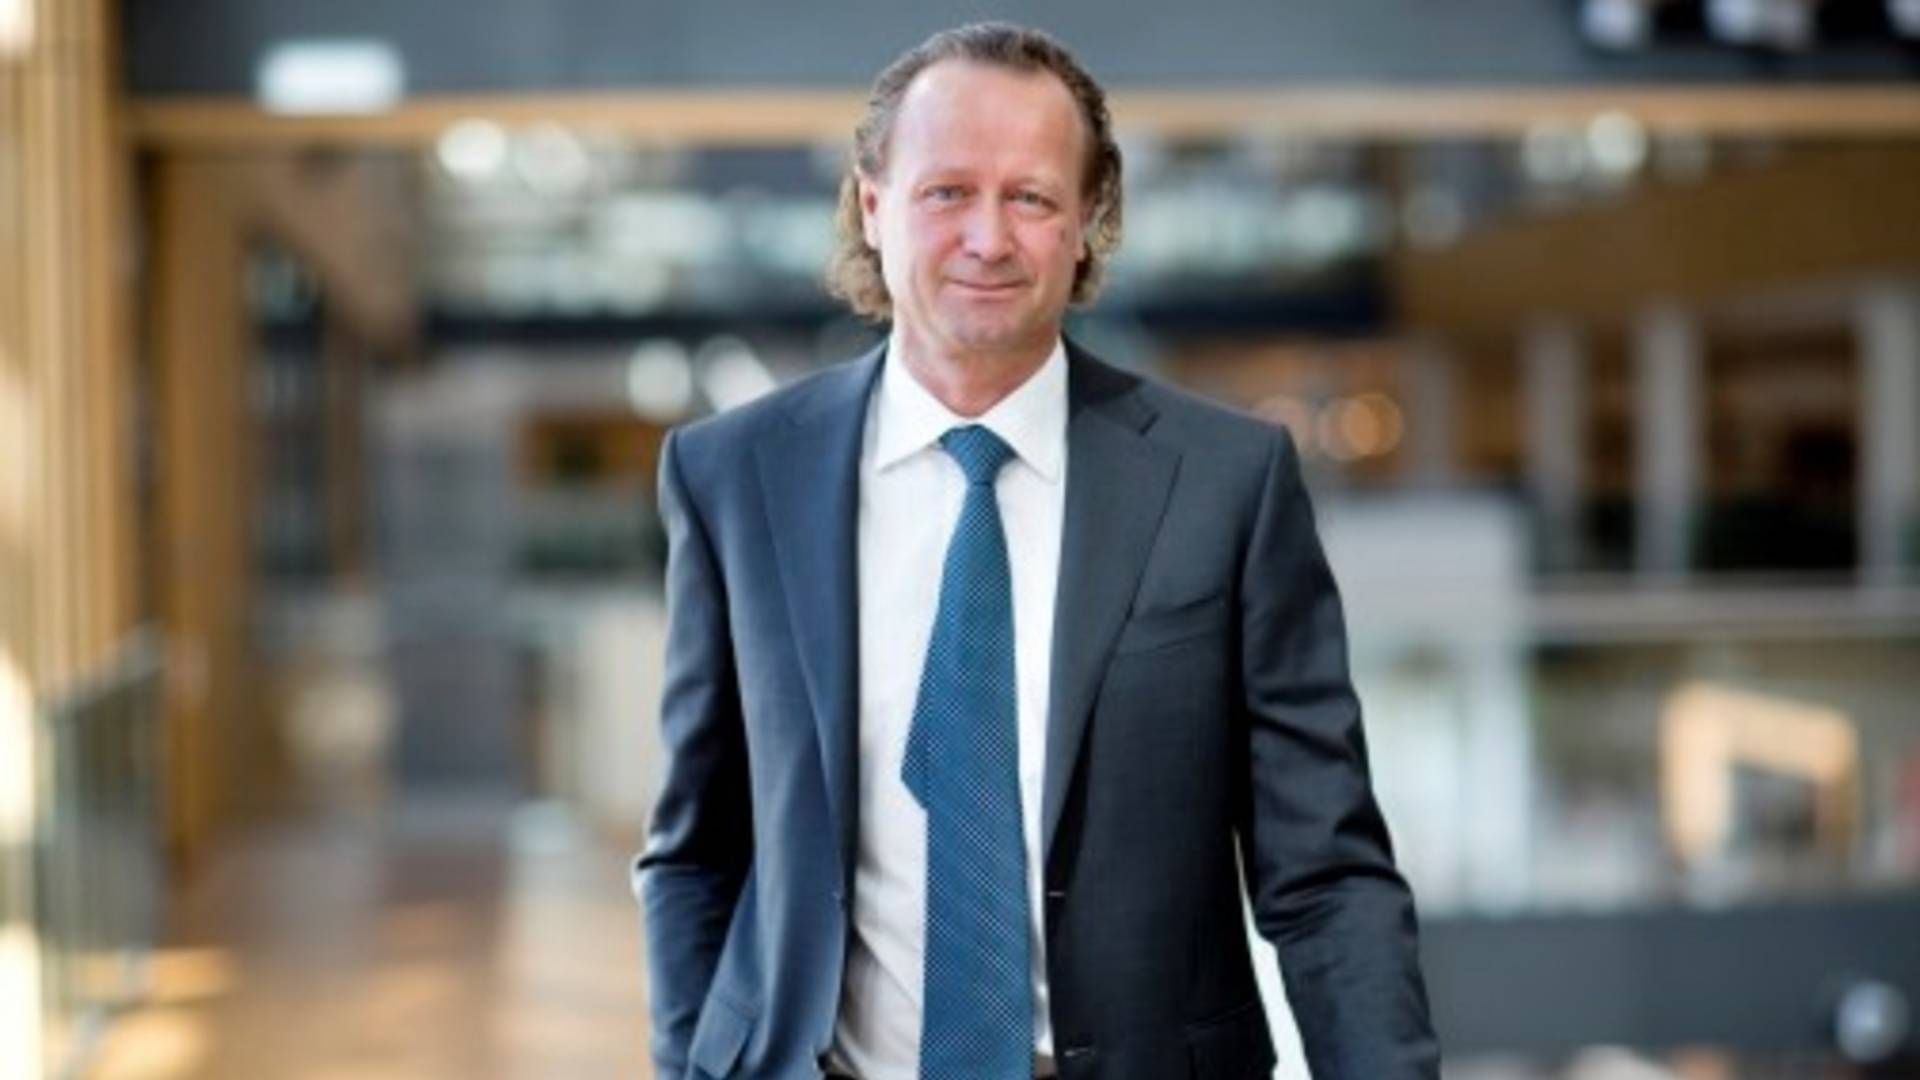 "Since 2018, and I would also say prior to that, we have met 25 of Denmark's biggest Tier 1 clients such as pension schemes, insurance companies and foundations," CEO of Storebrand Asset Management, Jan Erik Saugestad says to AMWatch. | Photo: PR / Storebrand Asset Management